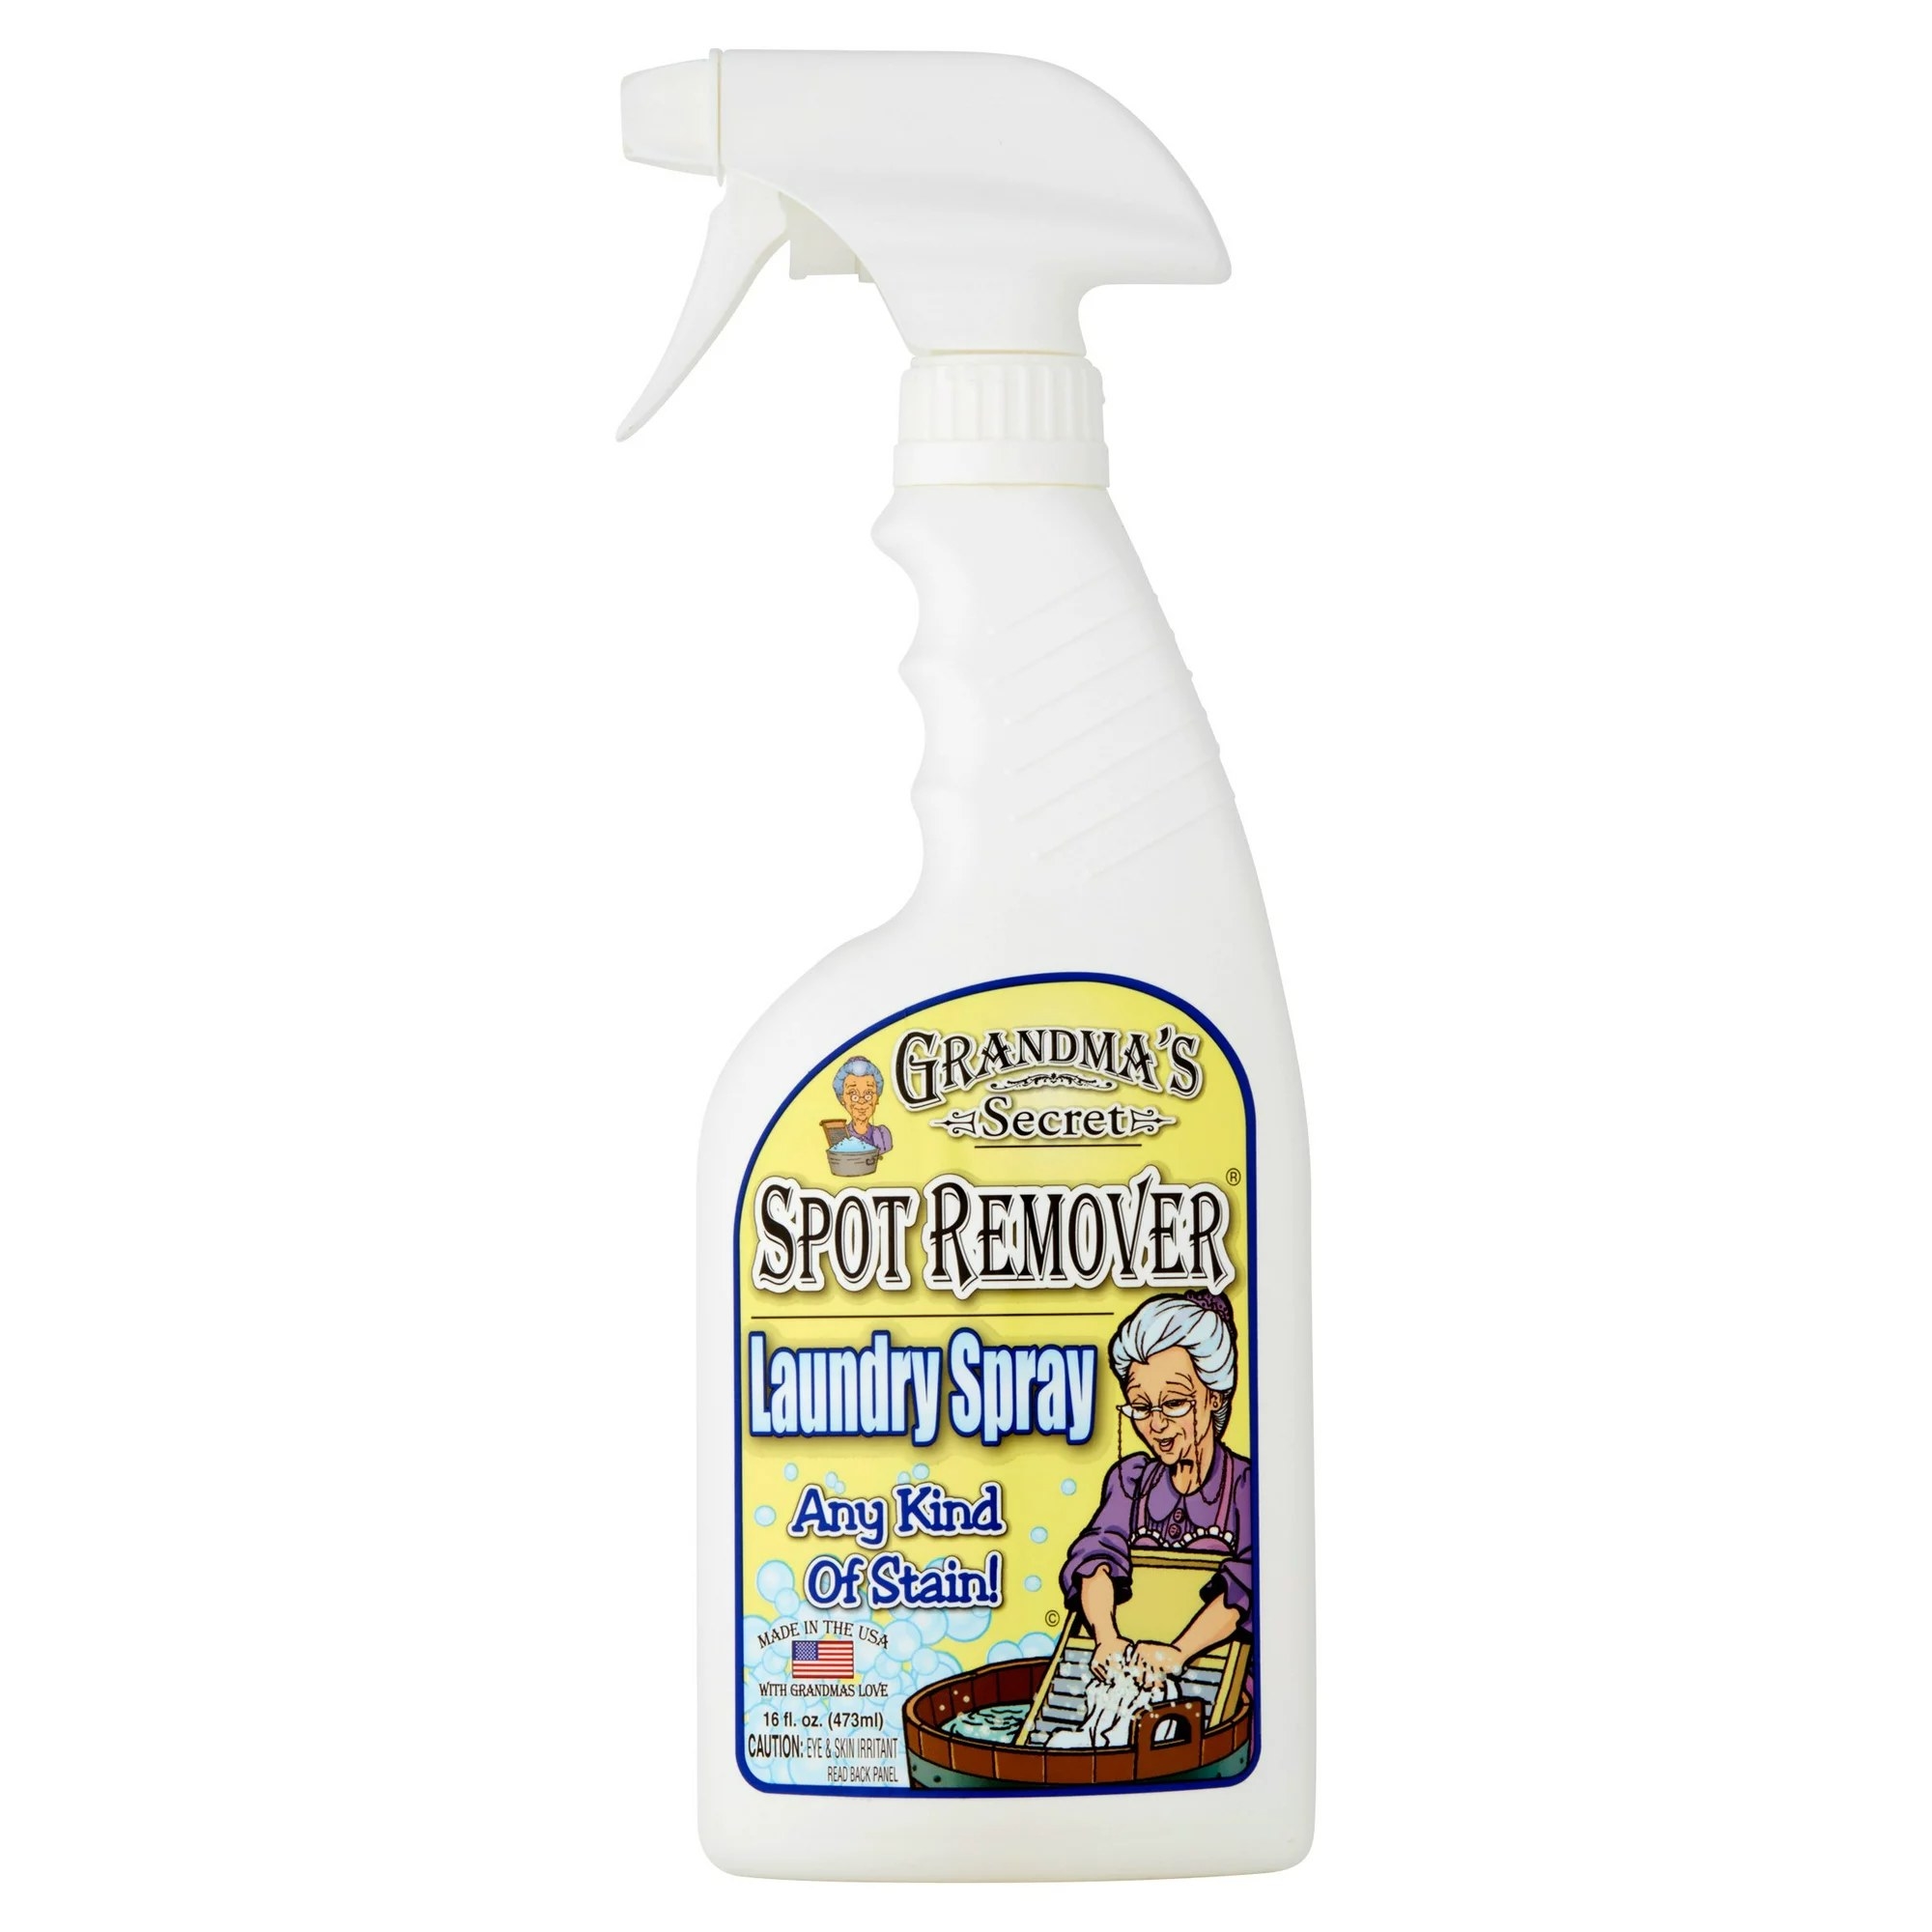 The stain remover spray